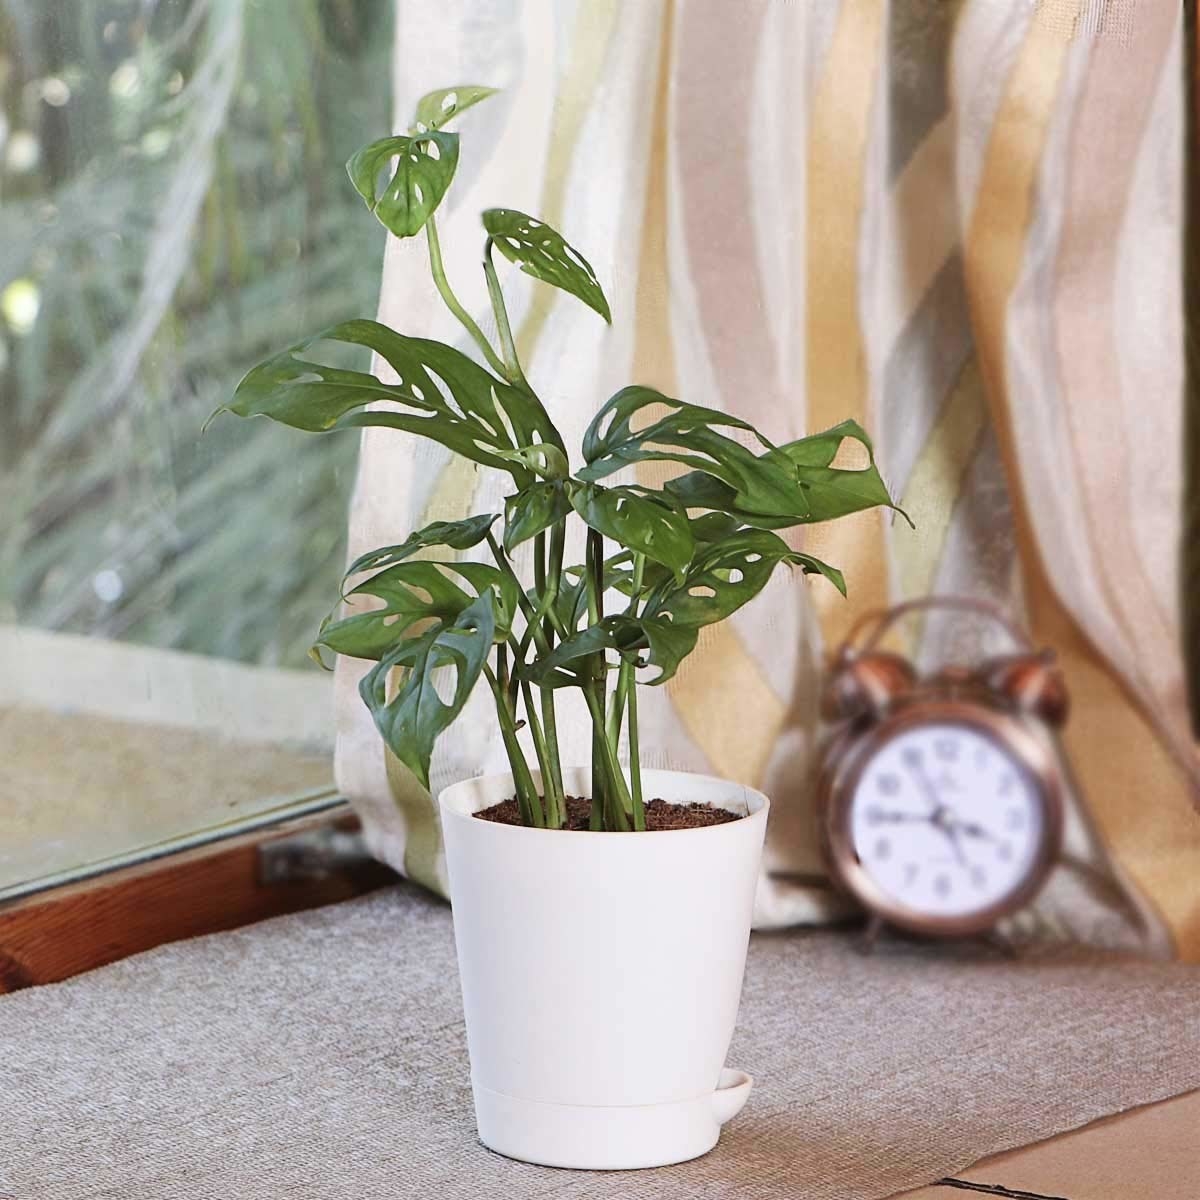 An indoor plant in a white self-watering pot kept next to a window